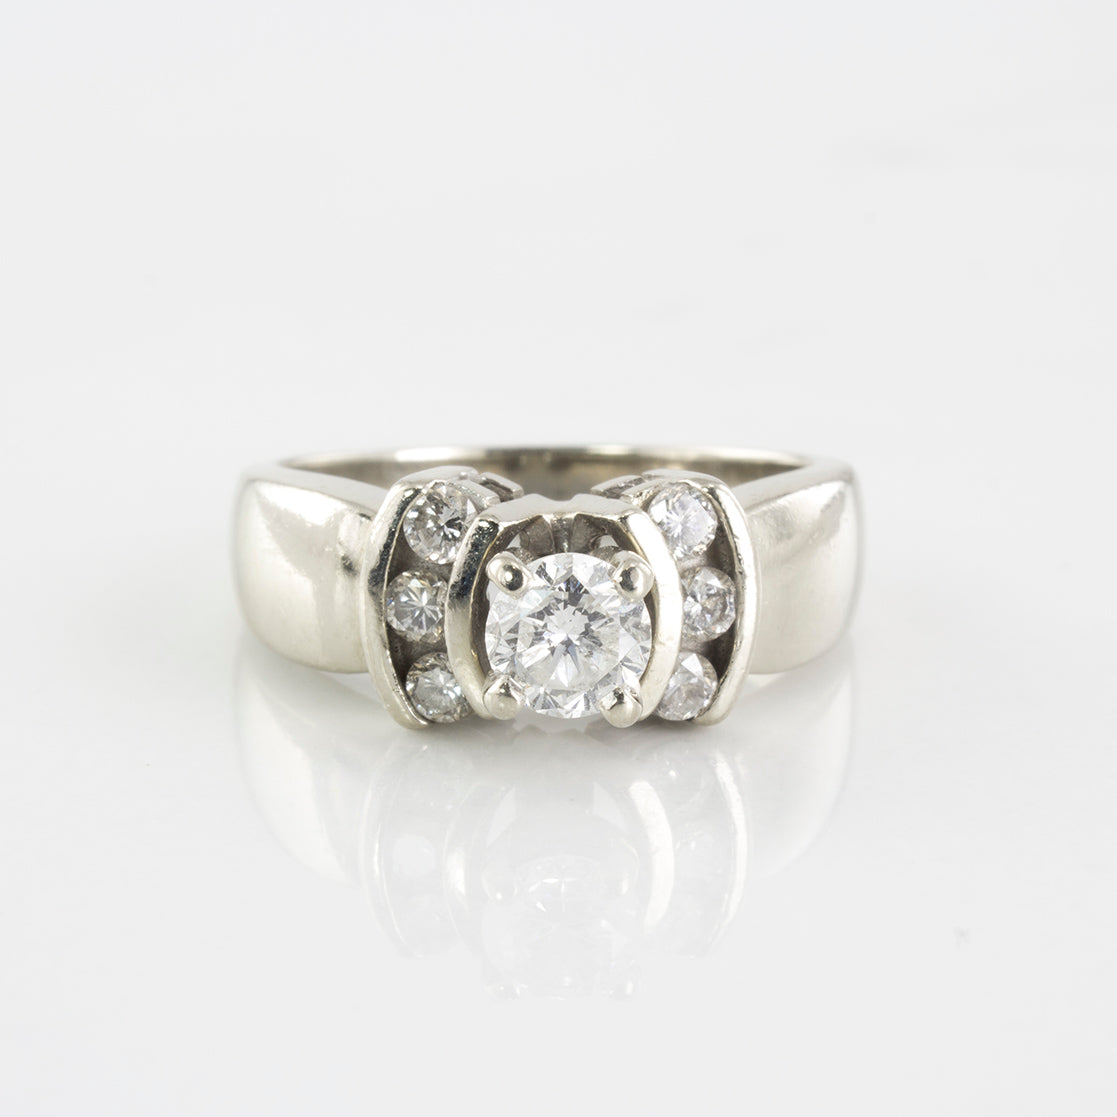 Channel Accented Diamond Engagement Ring | 0.51 ctw | SZ 5.75 |